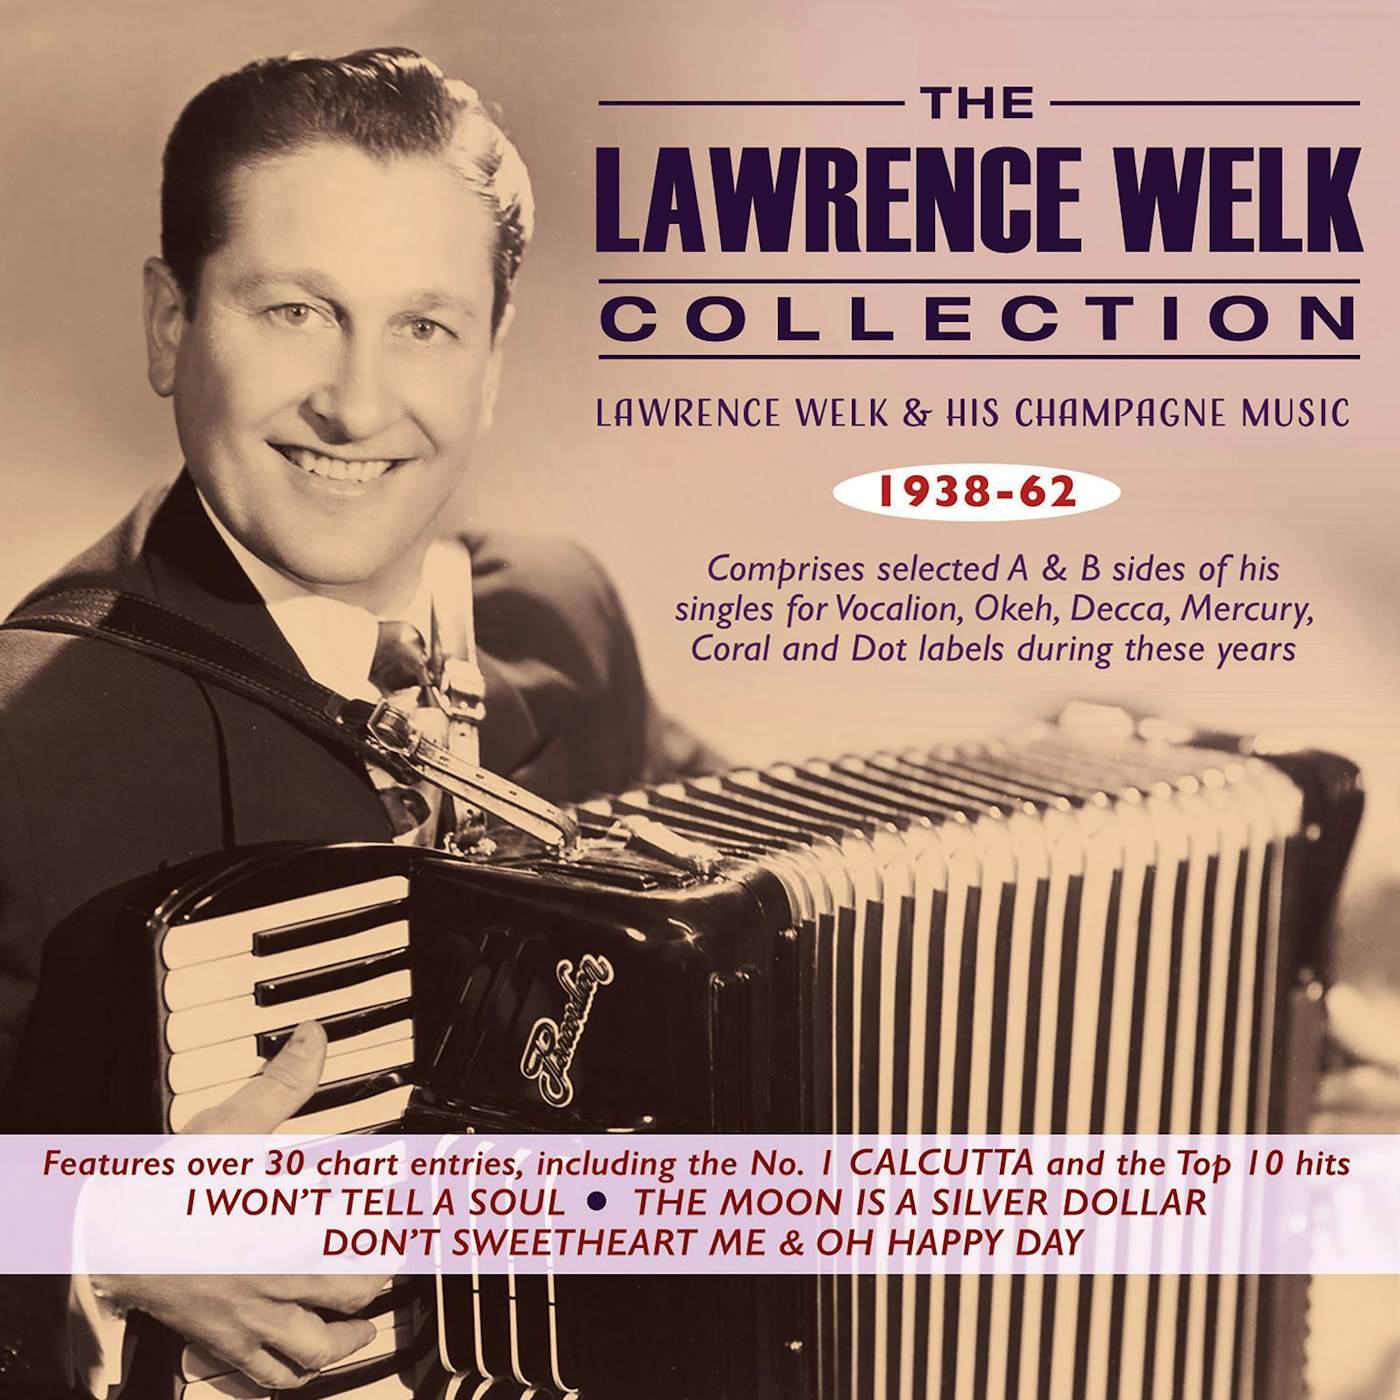 LAWRENCE WELK COLLECTION: LAWRENCE WELK & HIS CHAMPAGNE MUSIC 1938-62 CD